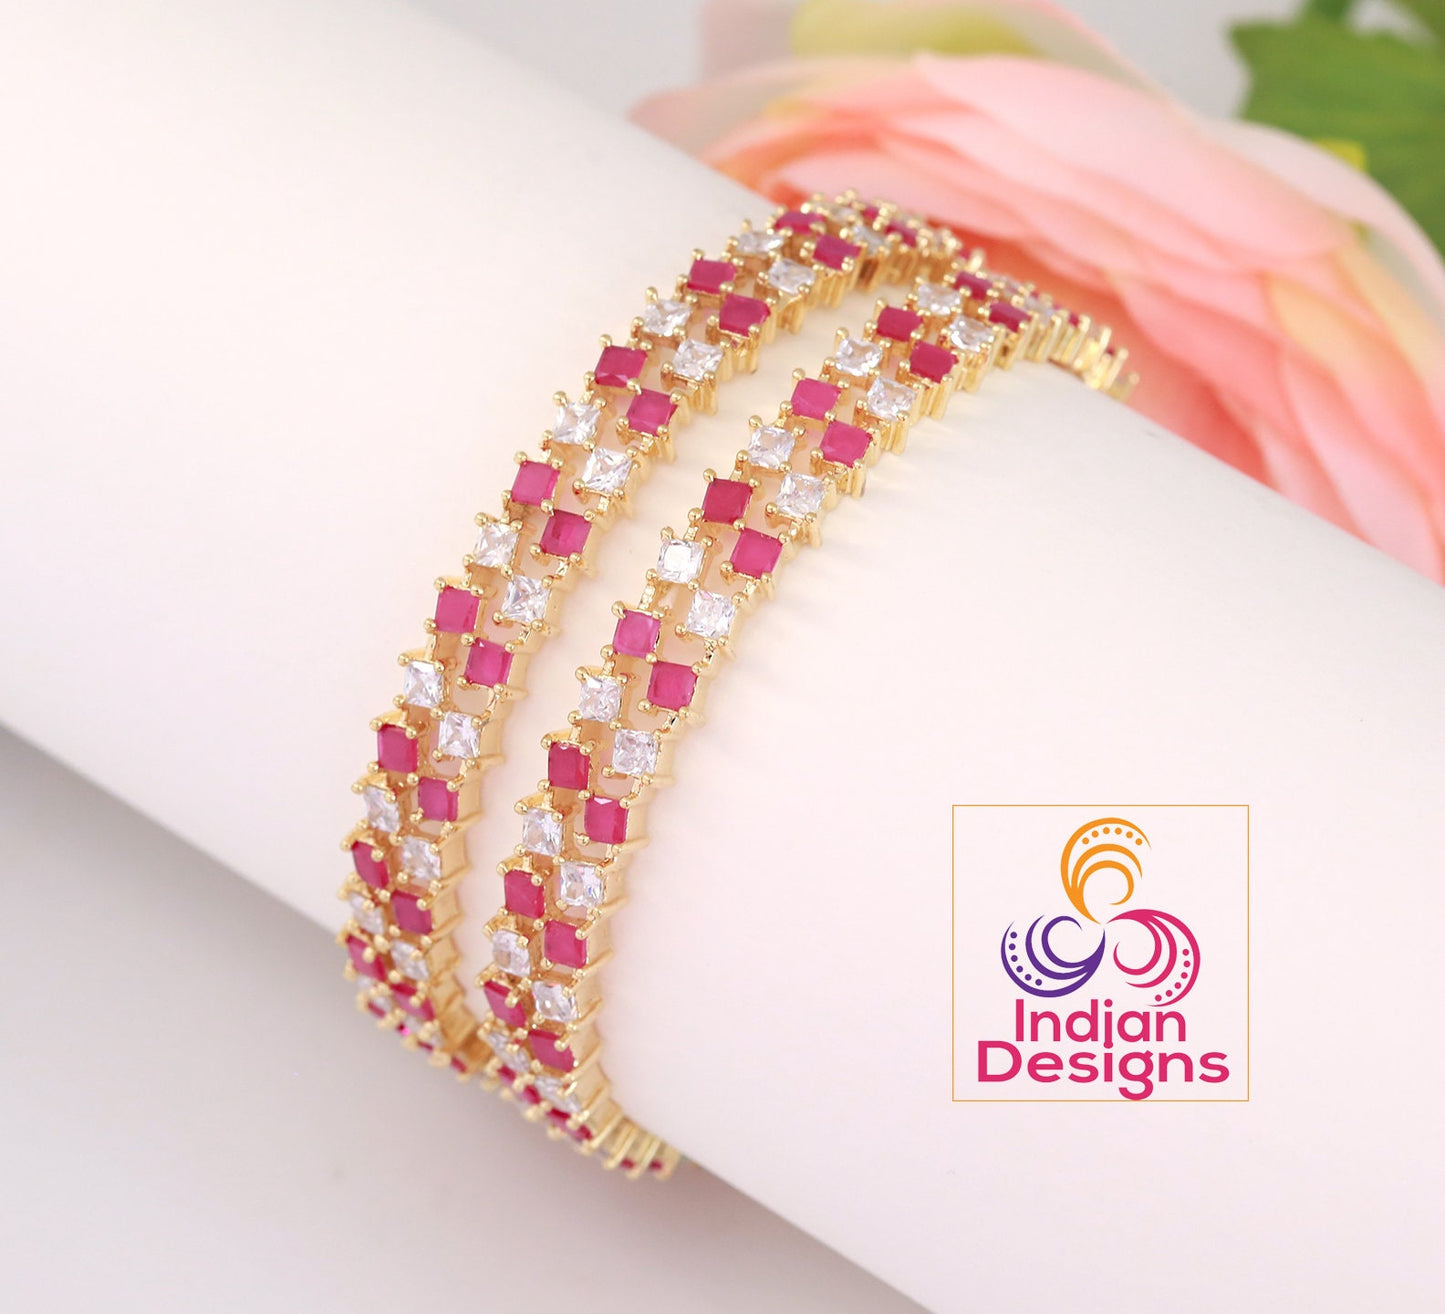 Shop Ruby Diamond gold bangle |Pair of  Gold plated bangle studded with square cut Ruby and white CZ stones | 2.6 size Ruby stone bangles